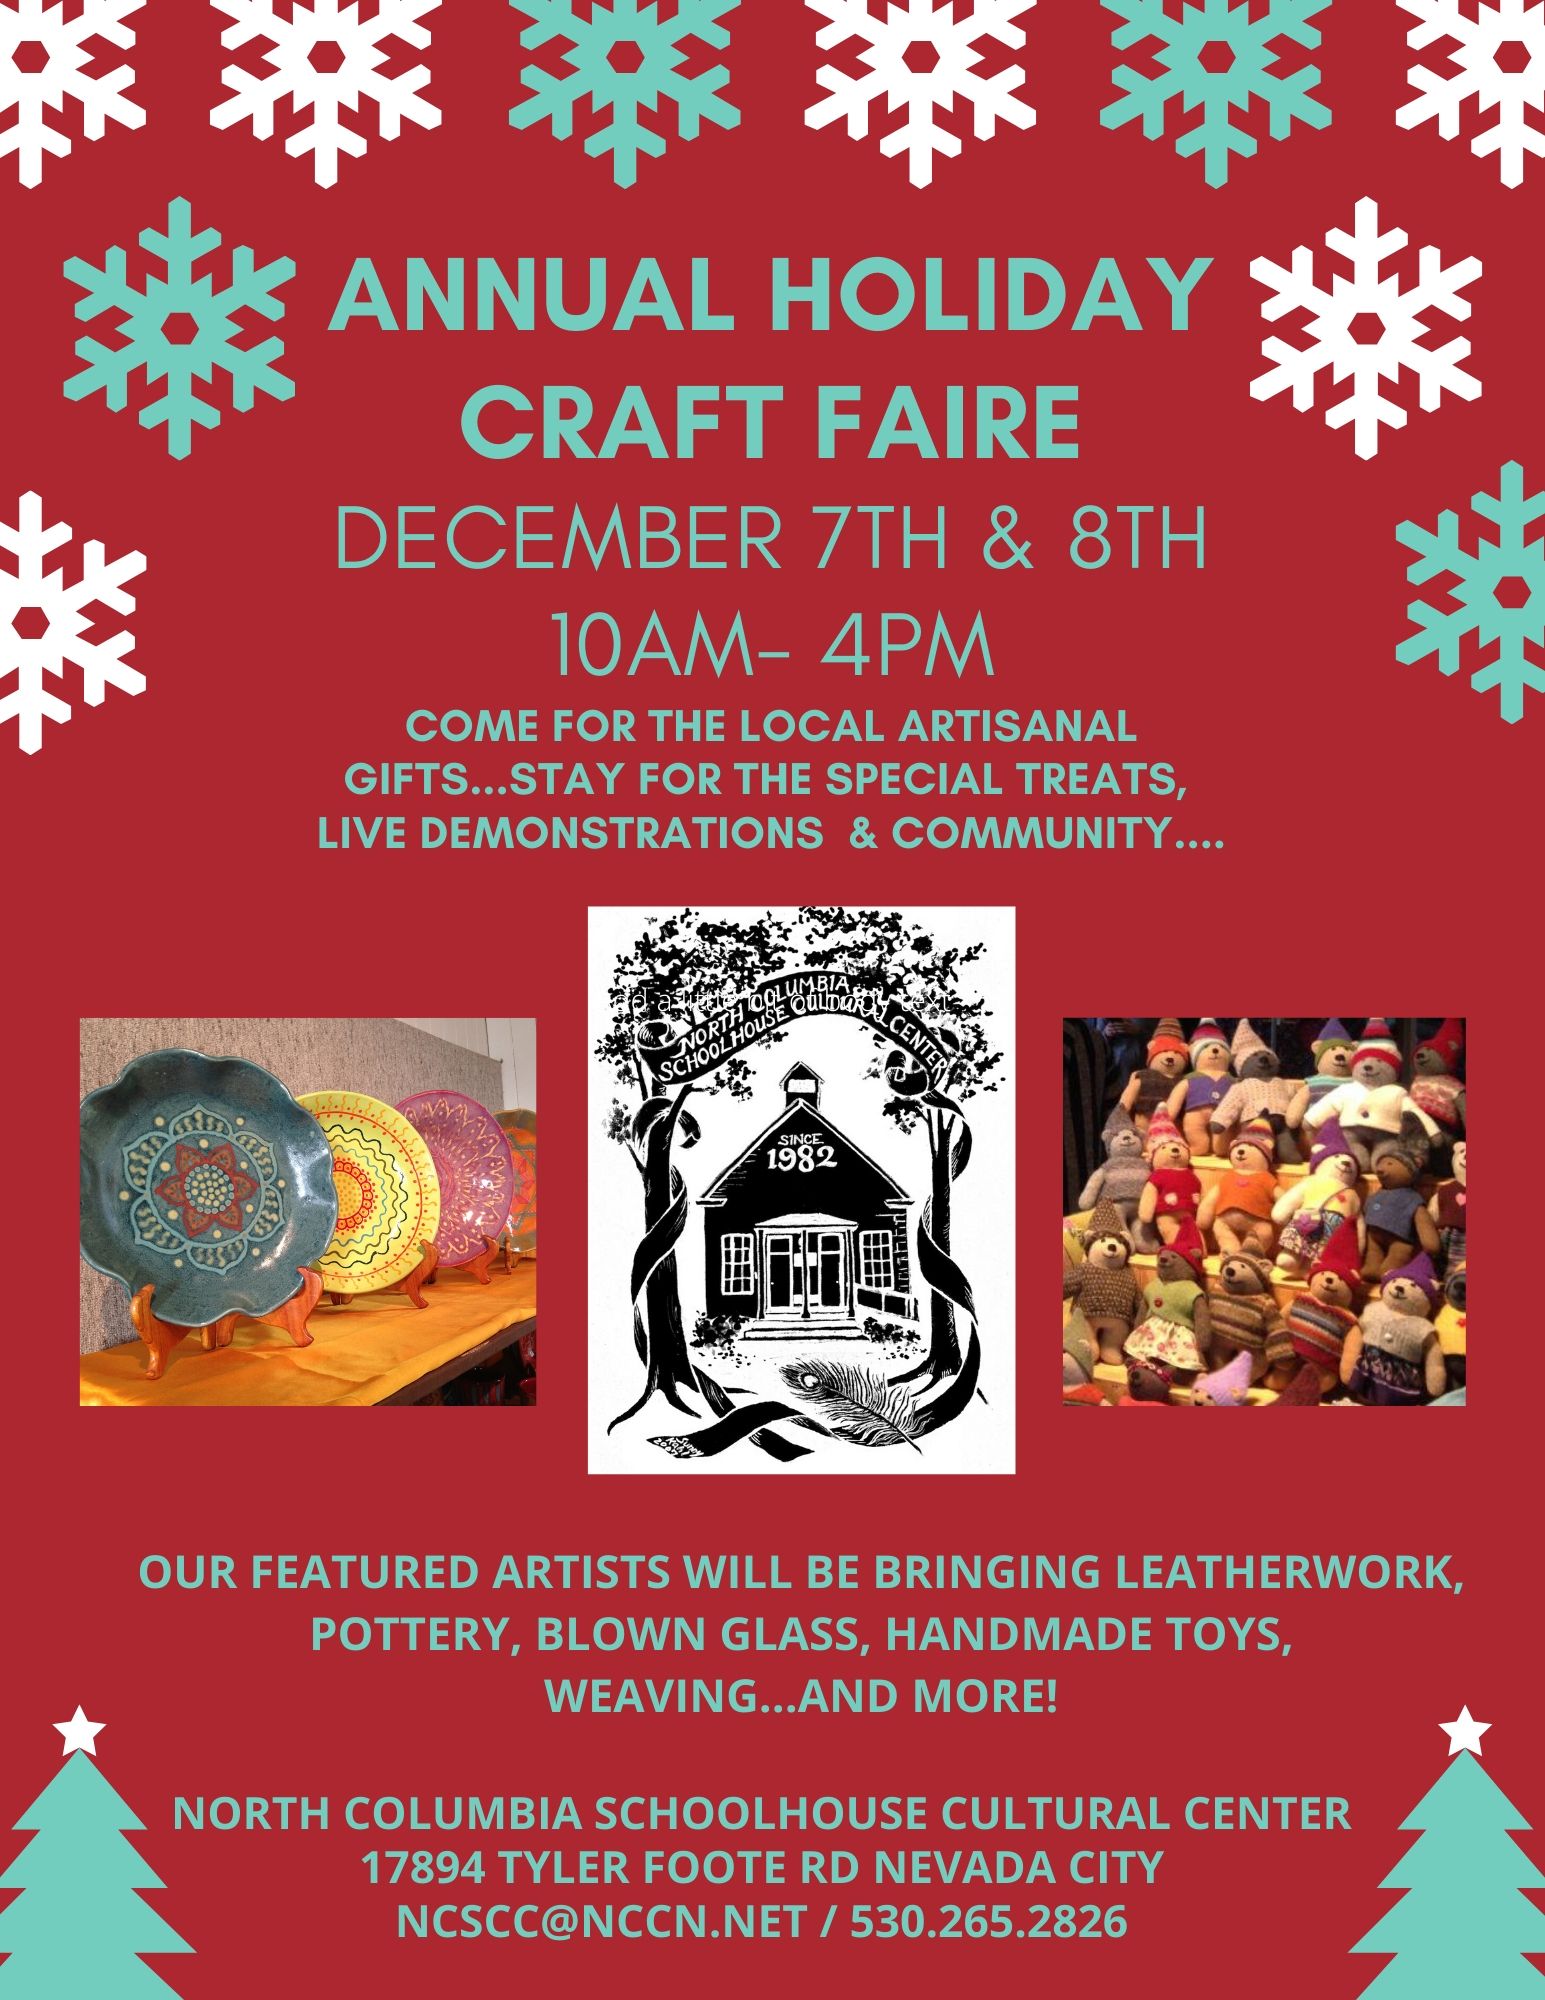 Annual Holiday Craft Faire December 7th & 8th, 10am-4pm